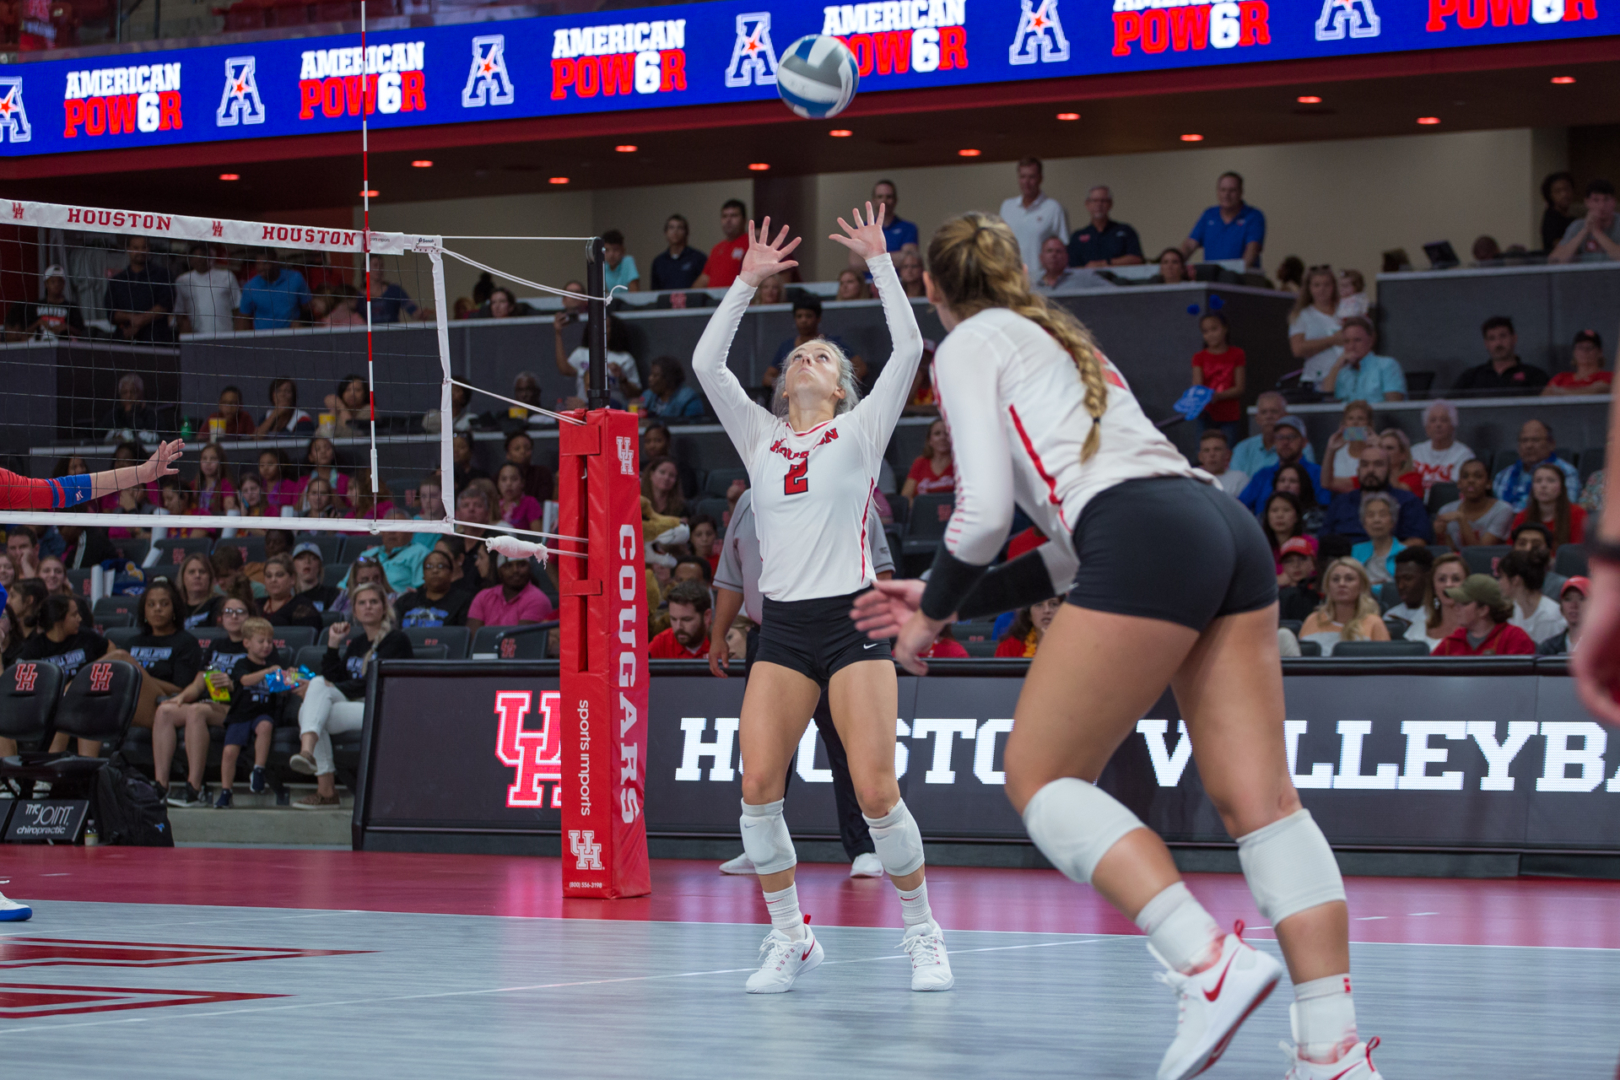 UH defeated ECU 3-2 Friday night after a nail-biting fourth and fifth set, and bring their conference record to 7-0. They prepare to meet Cincinnati at home on Sunday night in the Fertitta Center. | Trevor Nolley/The Cougar